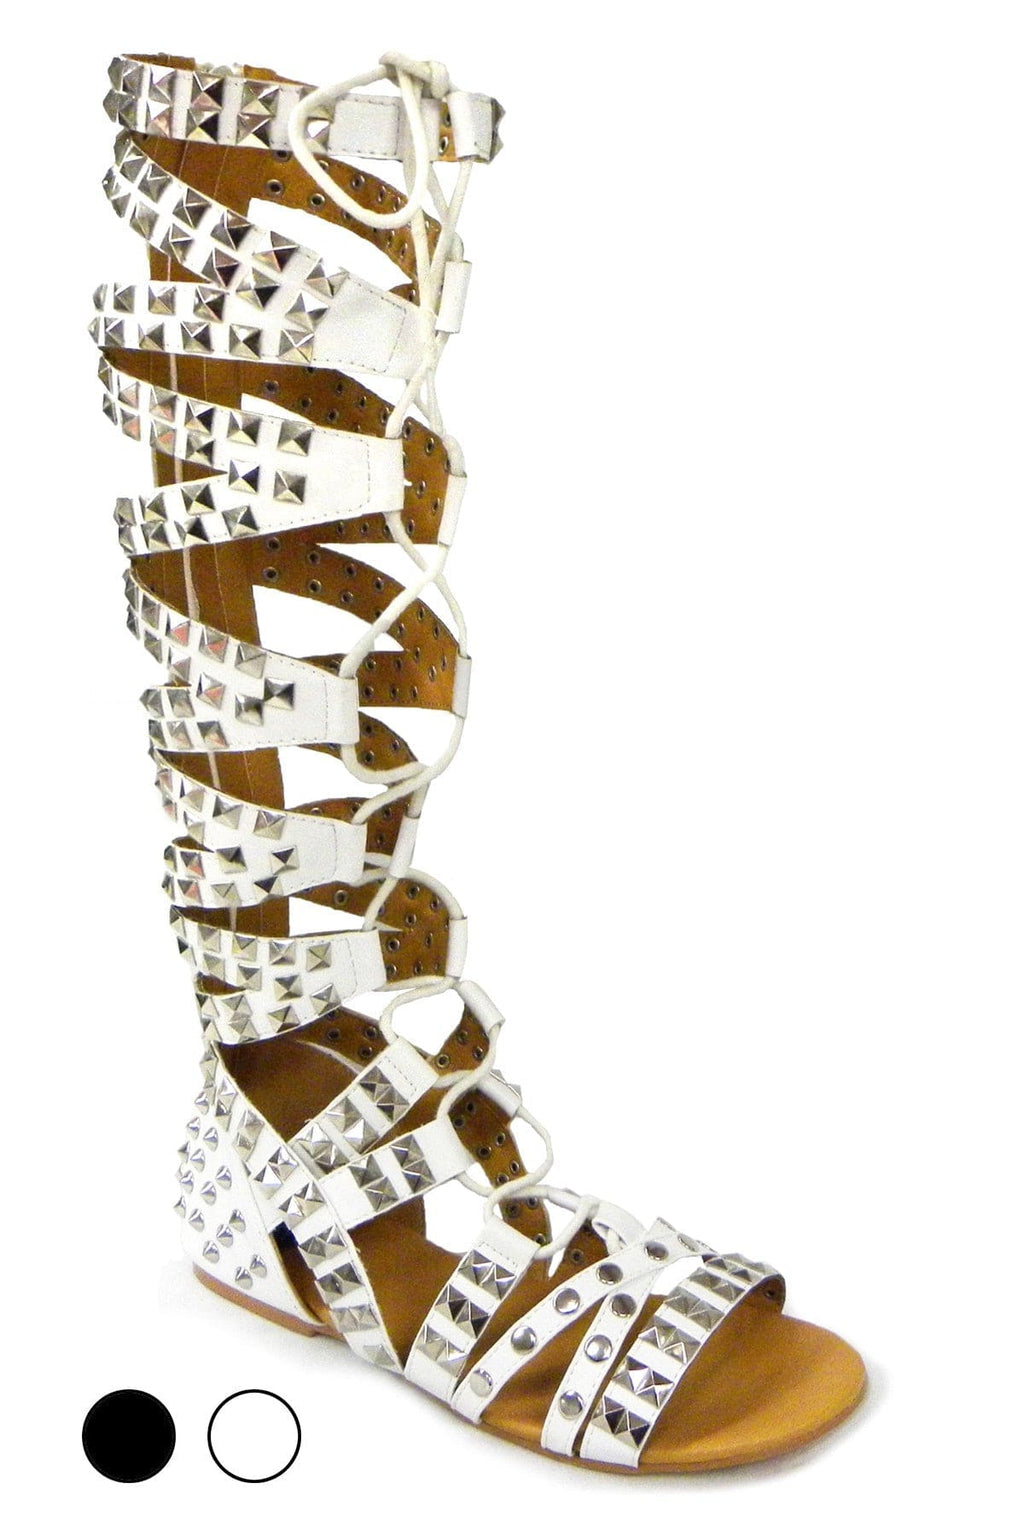 N.Y.L.A. SHOES Women's Sandals 11 / BLK N.Y.L.A. Shoes Anpunk Knee High Gladiator Sandals in Black or White